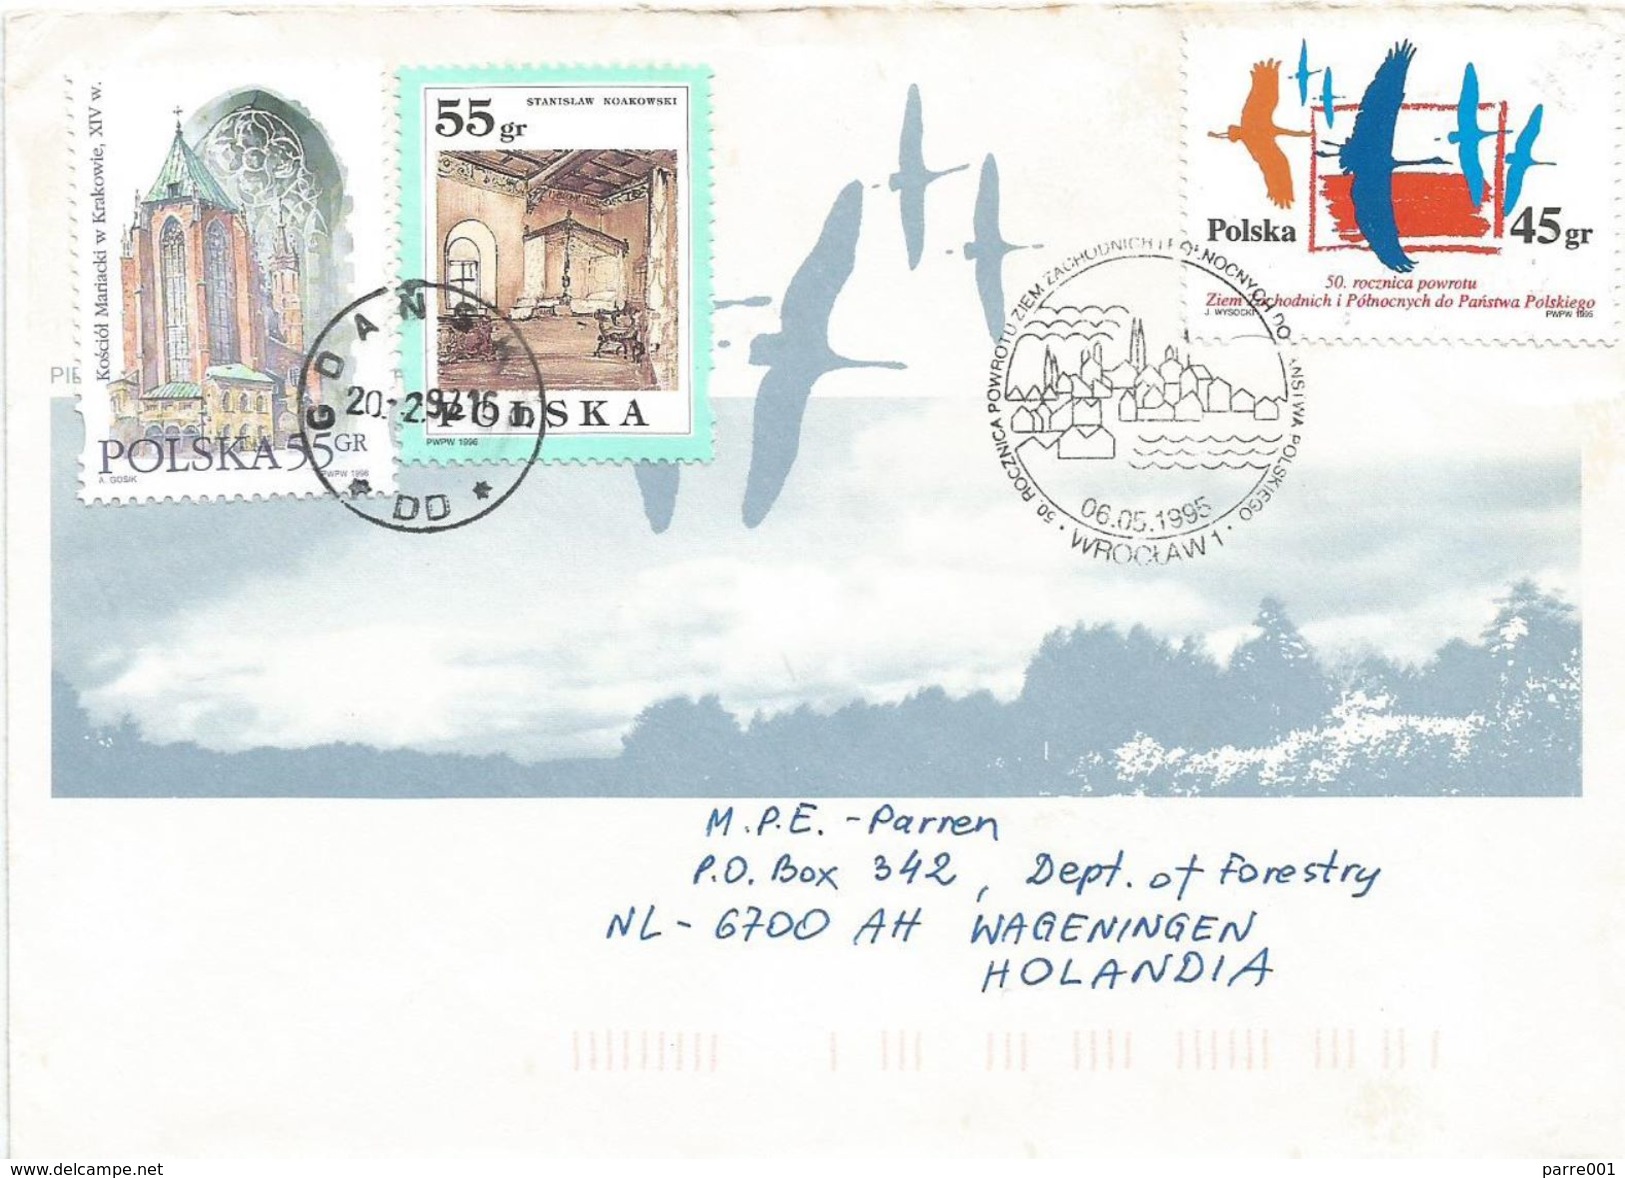 Poland 1995 Wroclaw Crane Cover - Cranes And Other Gruiformes